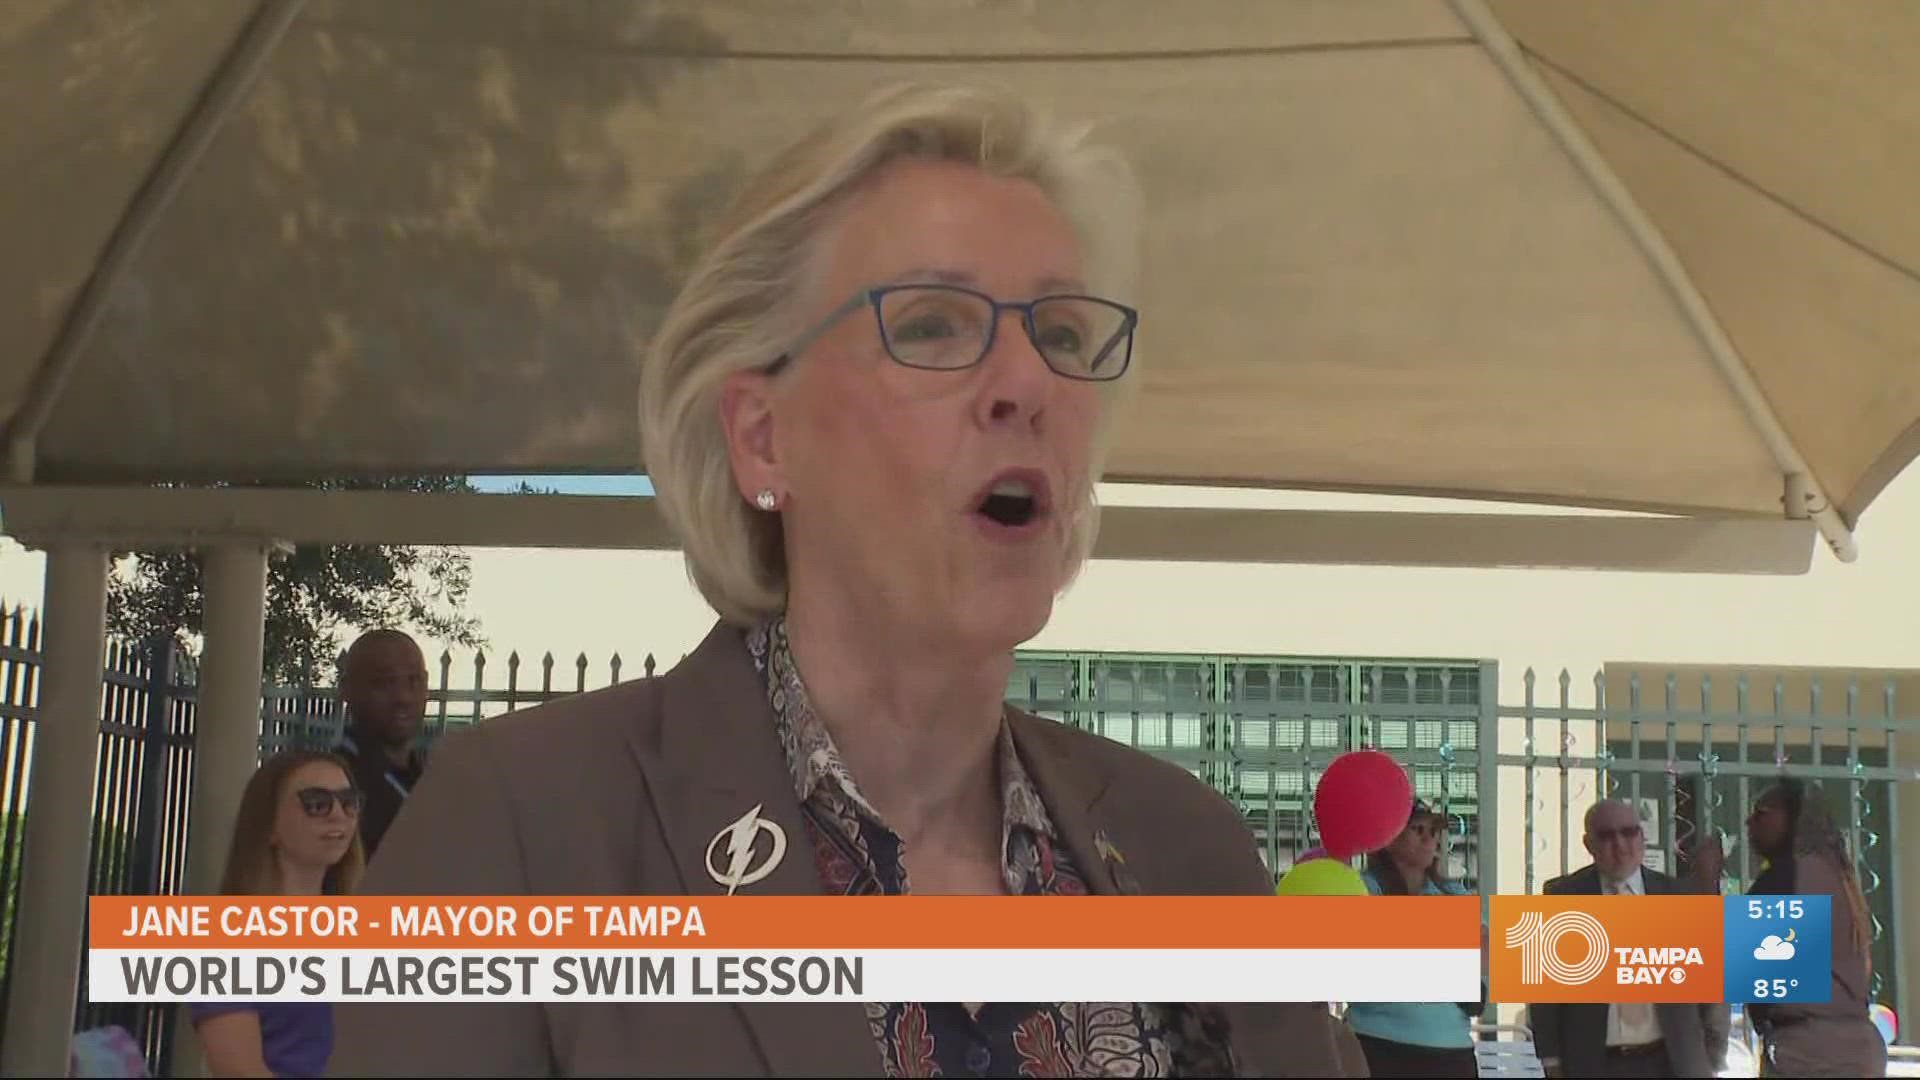 Parents are encouraged to sign their kids up for swimming lessons this summer.